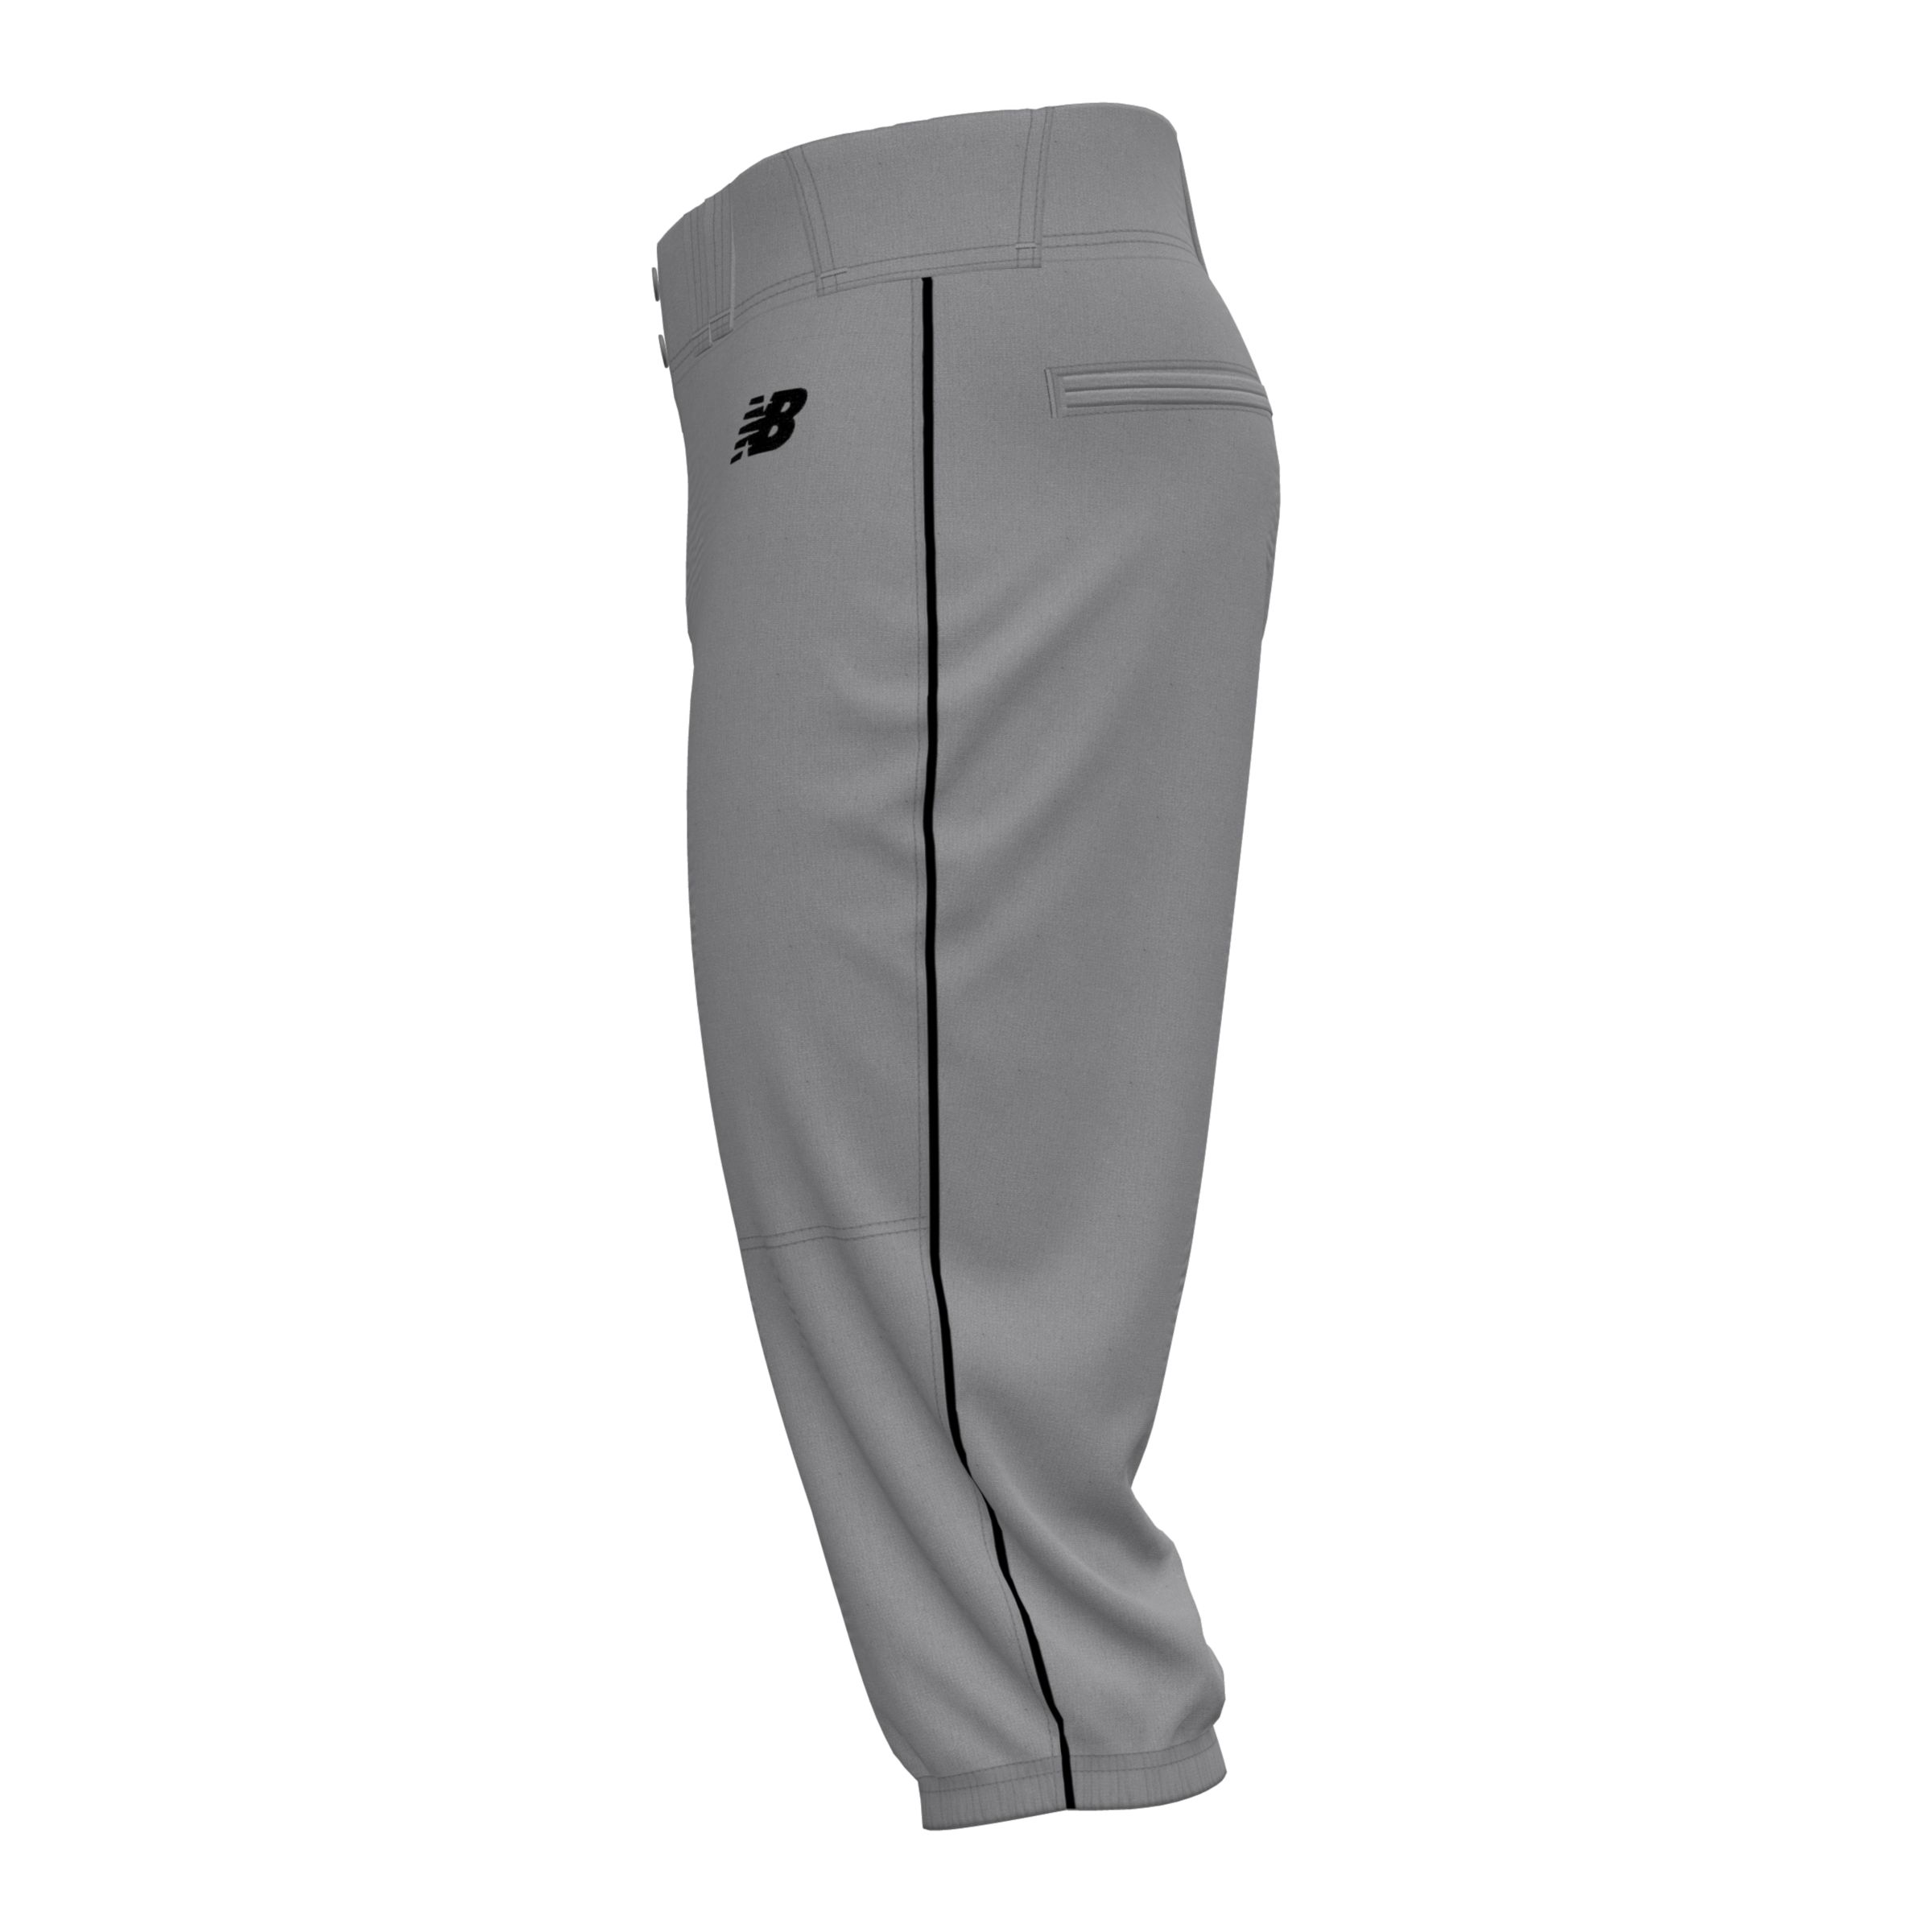 NB Men's Adversary 2.0 Tapered Piped Pant